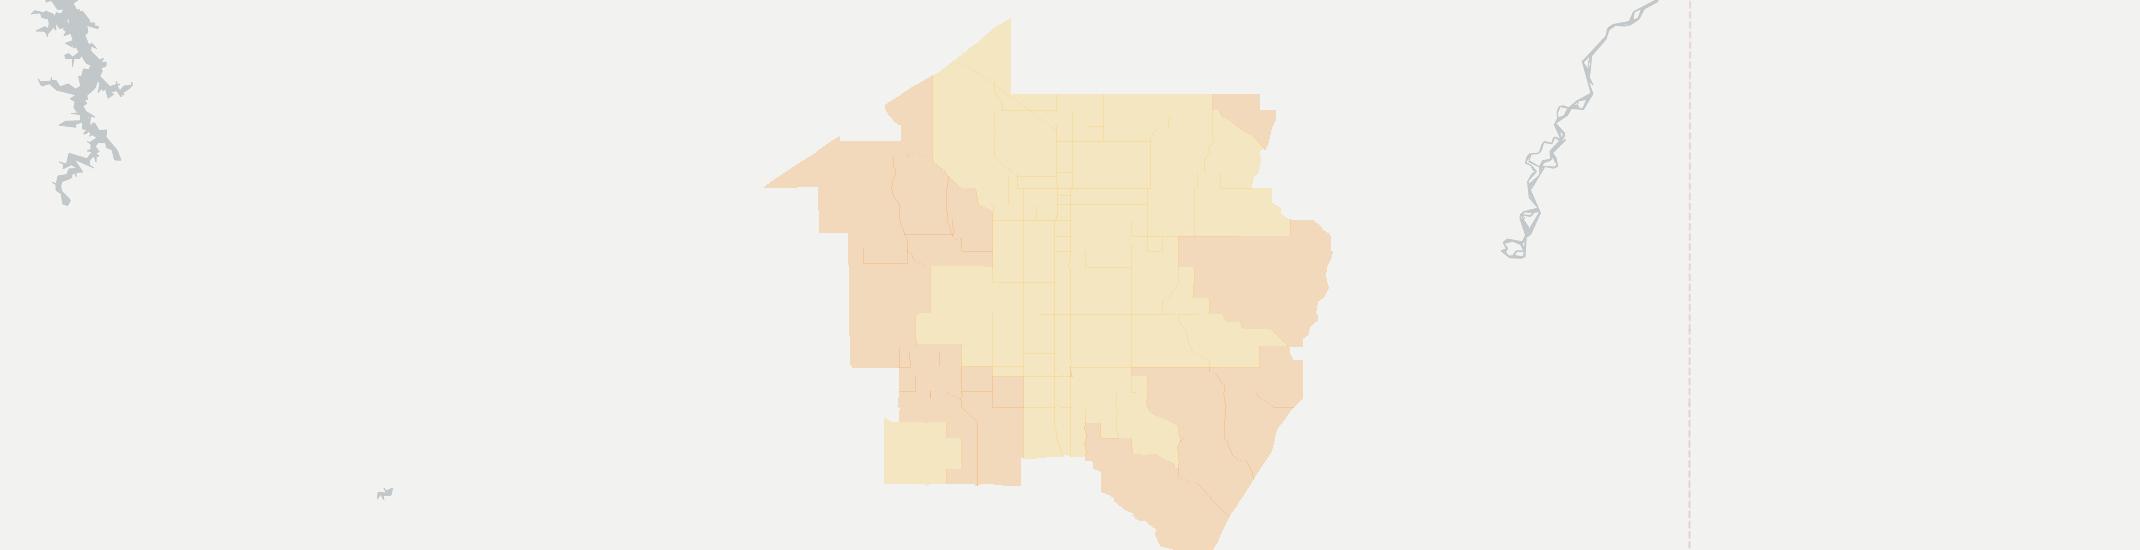 Bloomfield Internet Competition Map. Click for interactive map.